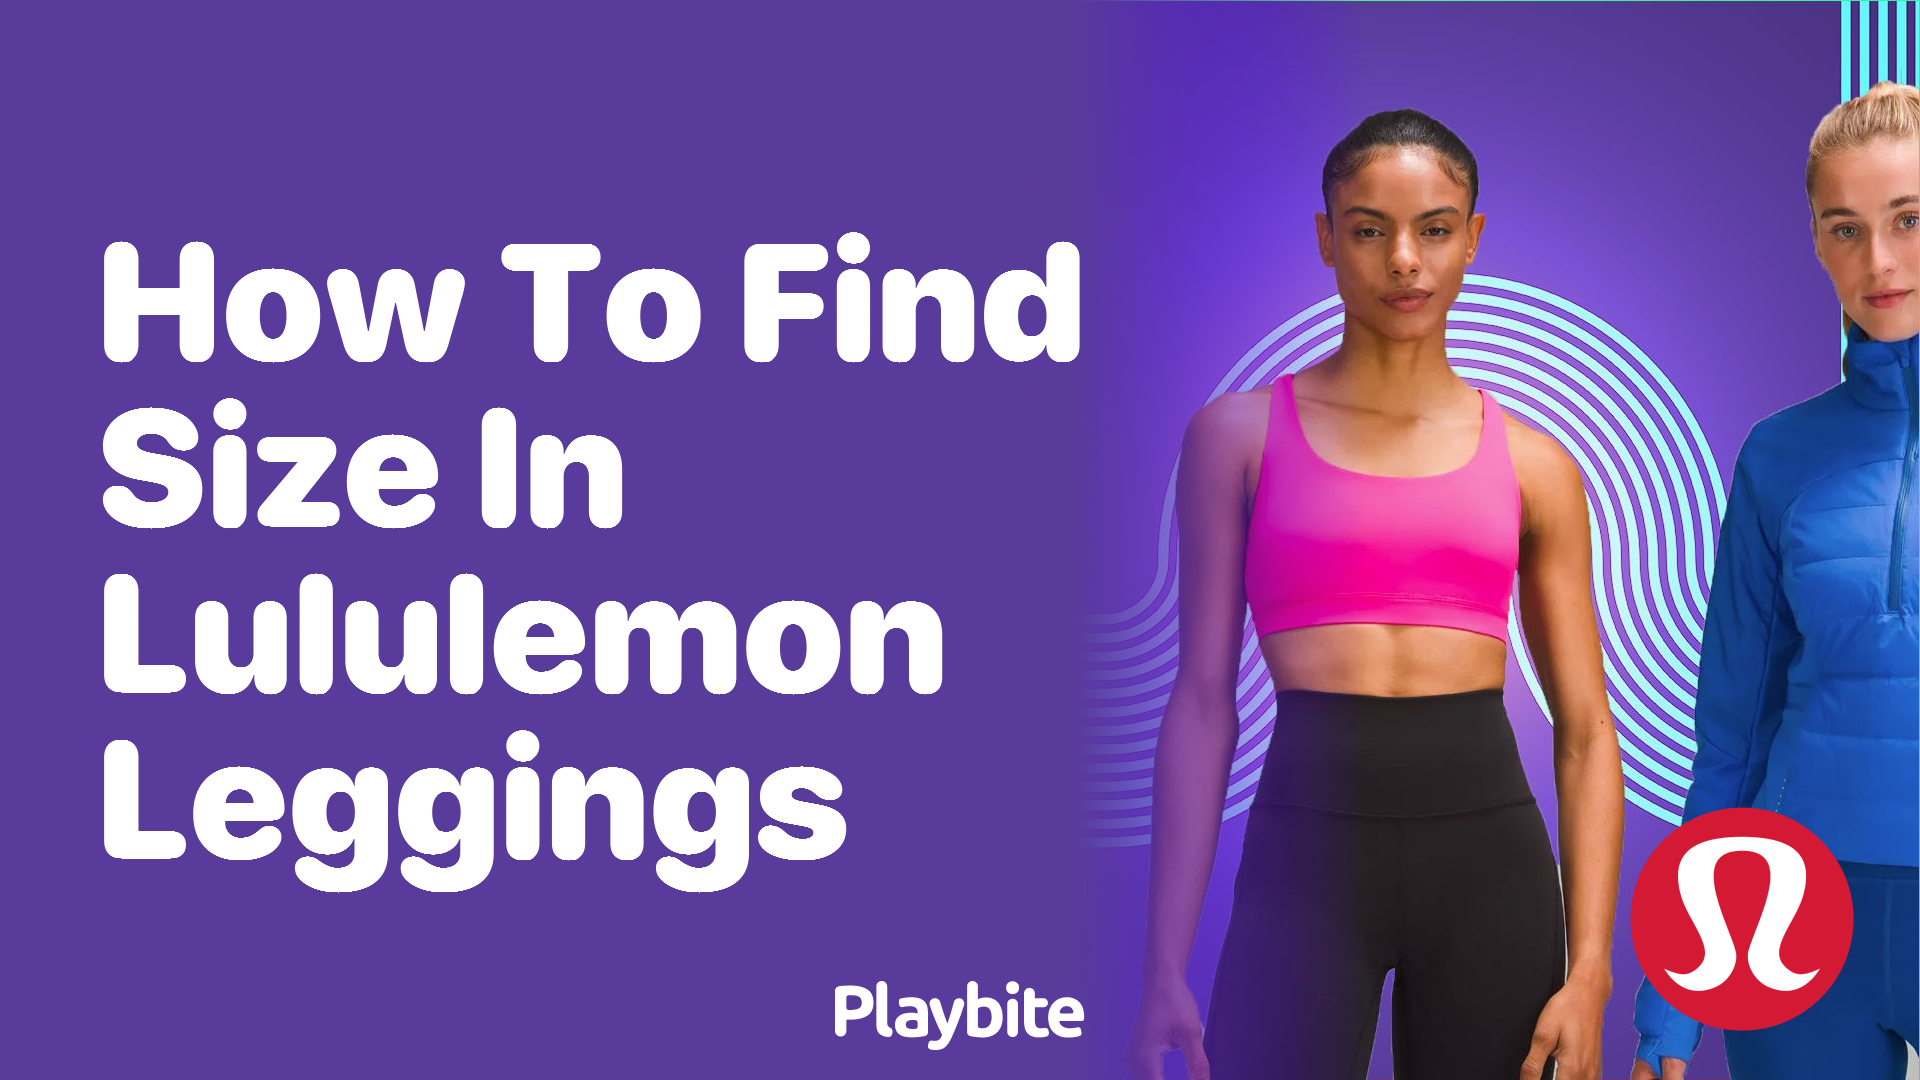 How to Know Your Lululemon Legging Size - Playbite